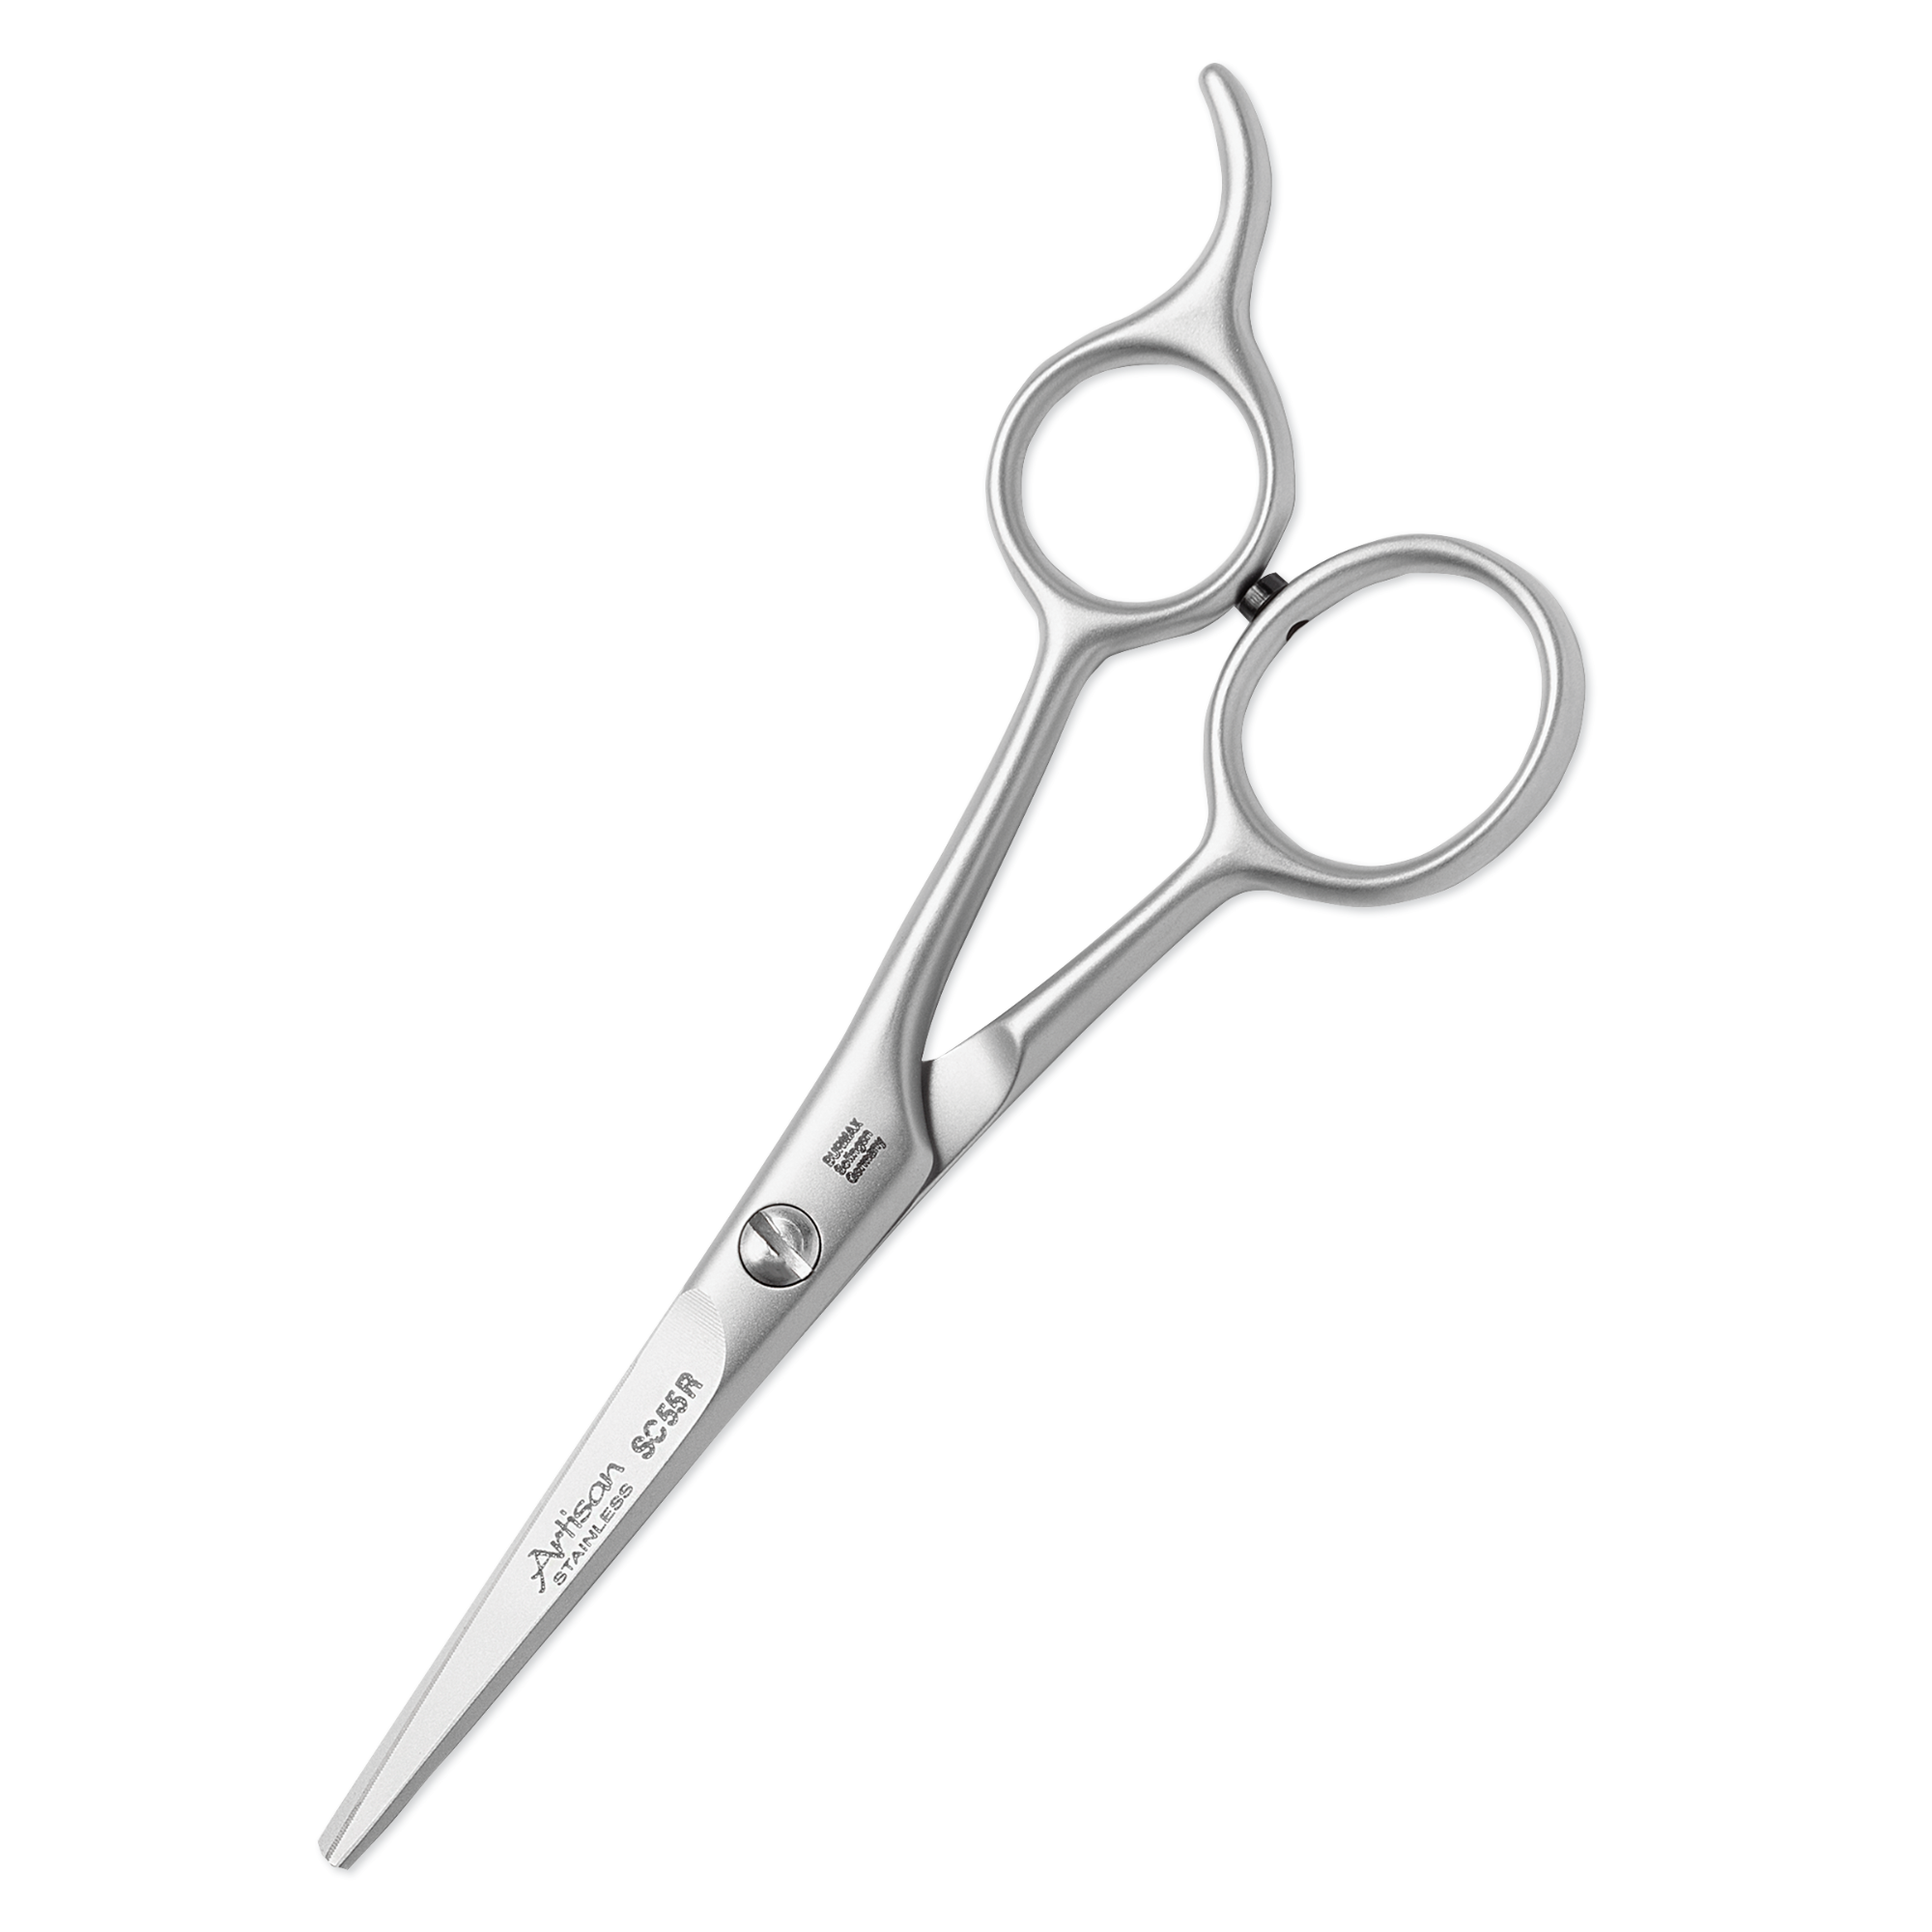 5-1/2" Stainless Steel Shear with Finger-Rest